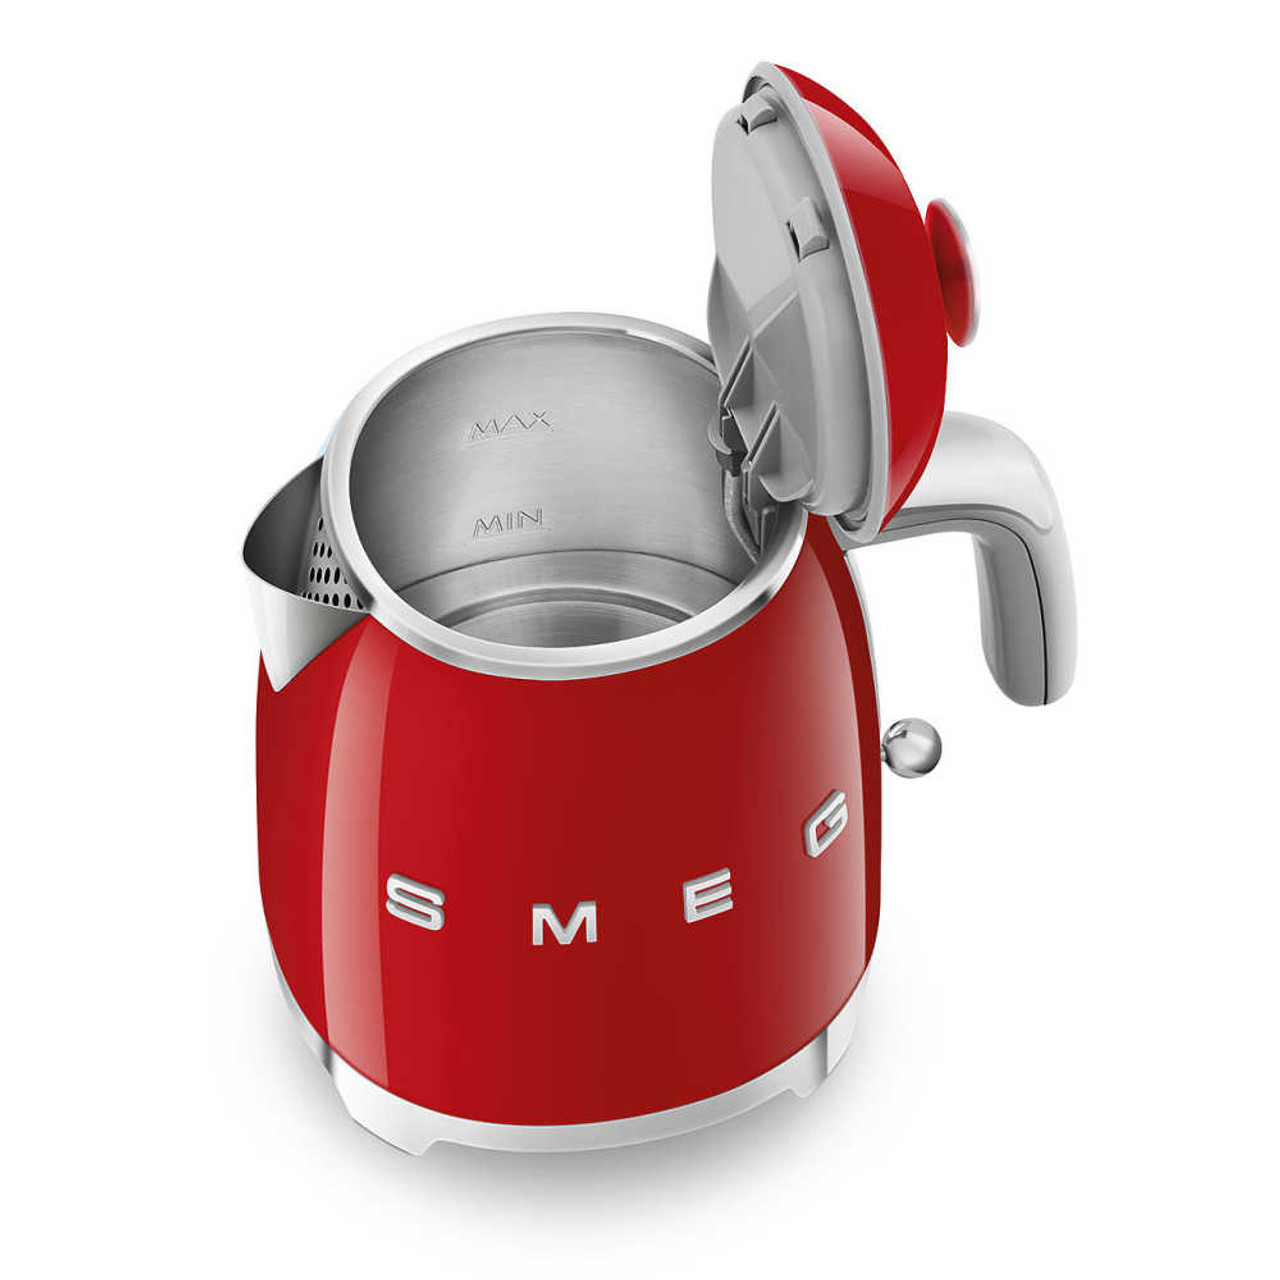 https://cdn11.bigcommerce.com/s-hccytny0od/images/stencil/1280x1280/products/4253/16114/smeg-mini-electric-kettle-red__31643.1630247852.jpg?c=2?imbypass=on